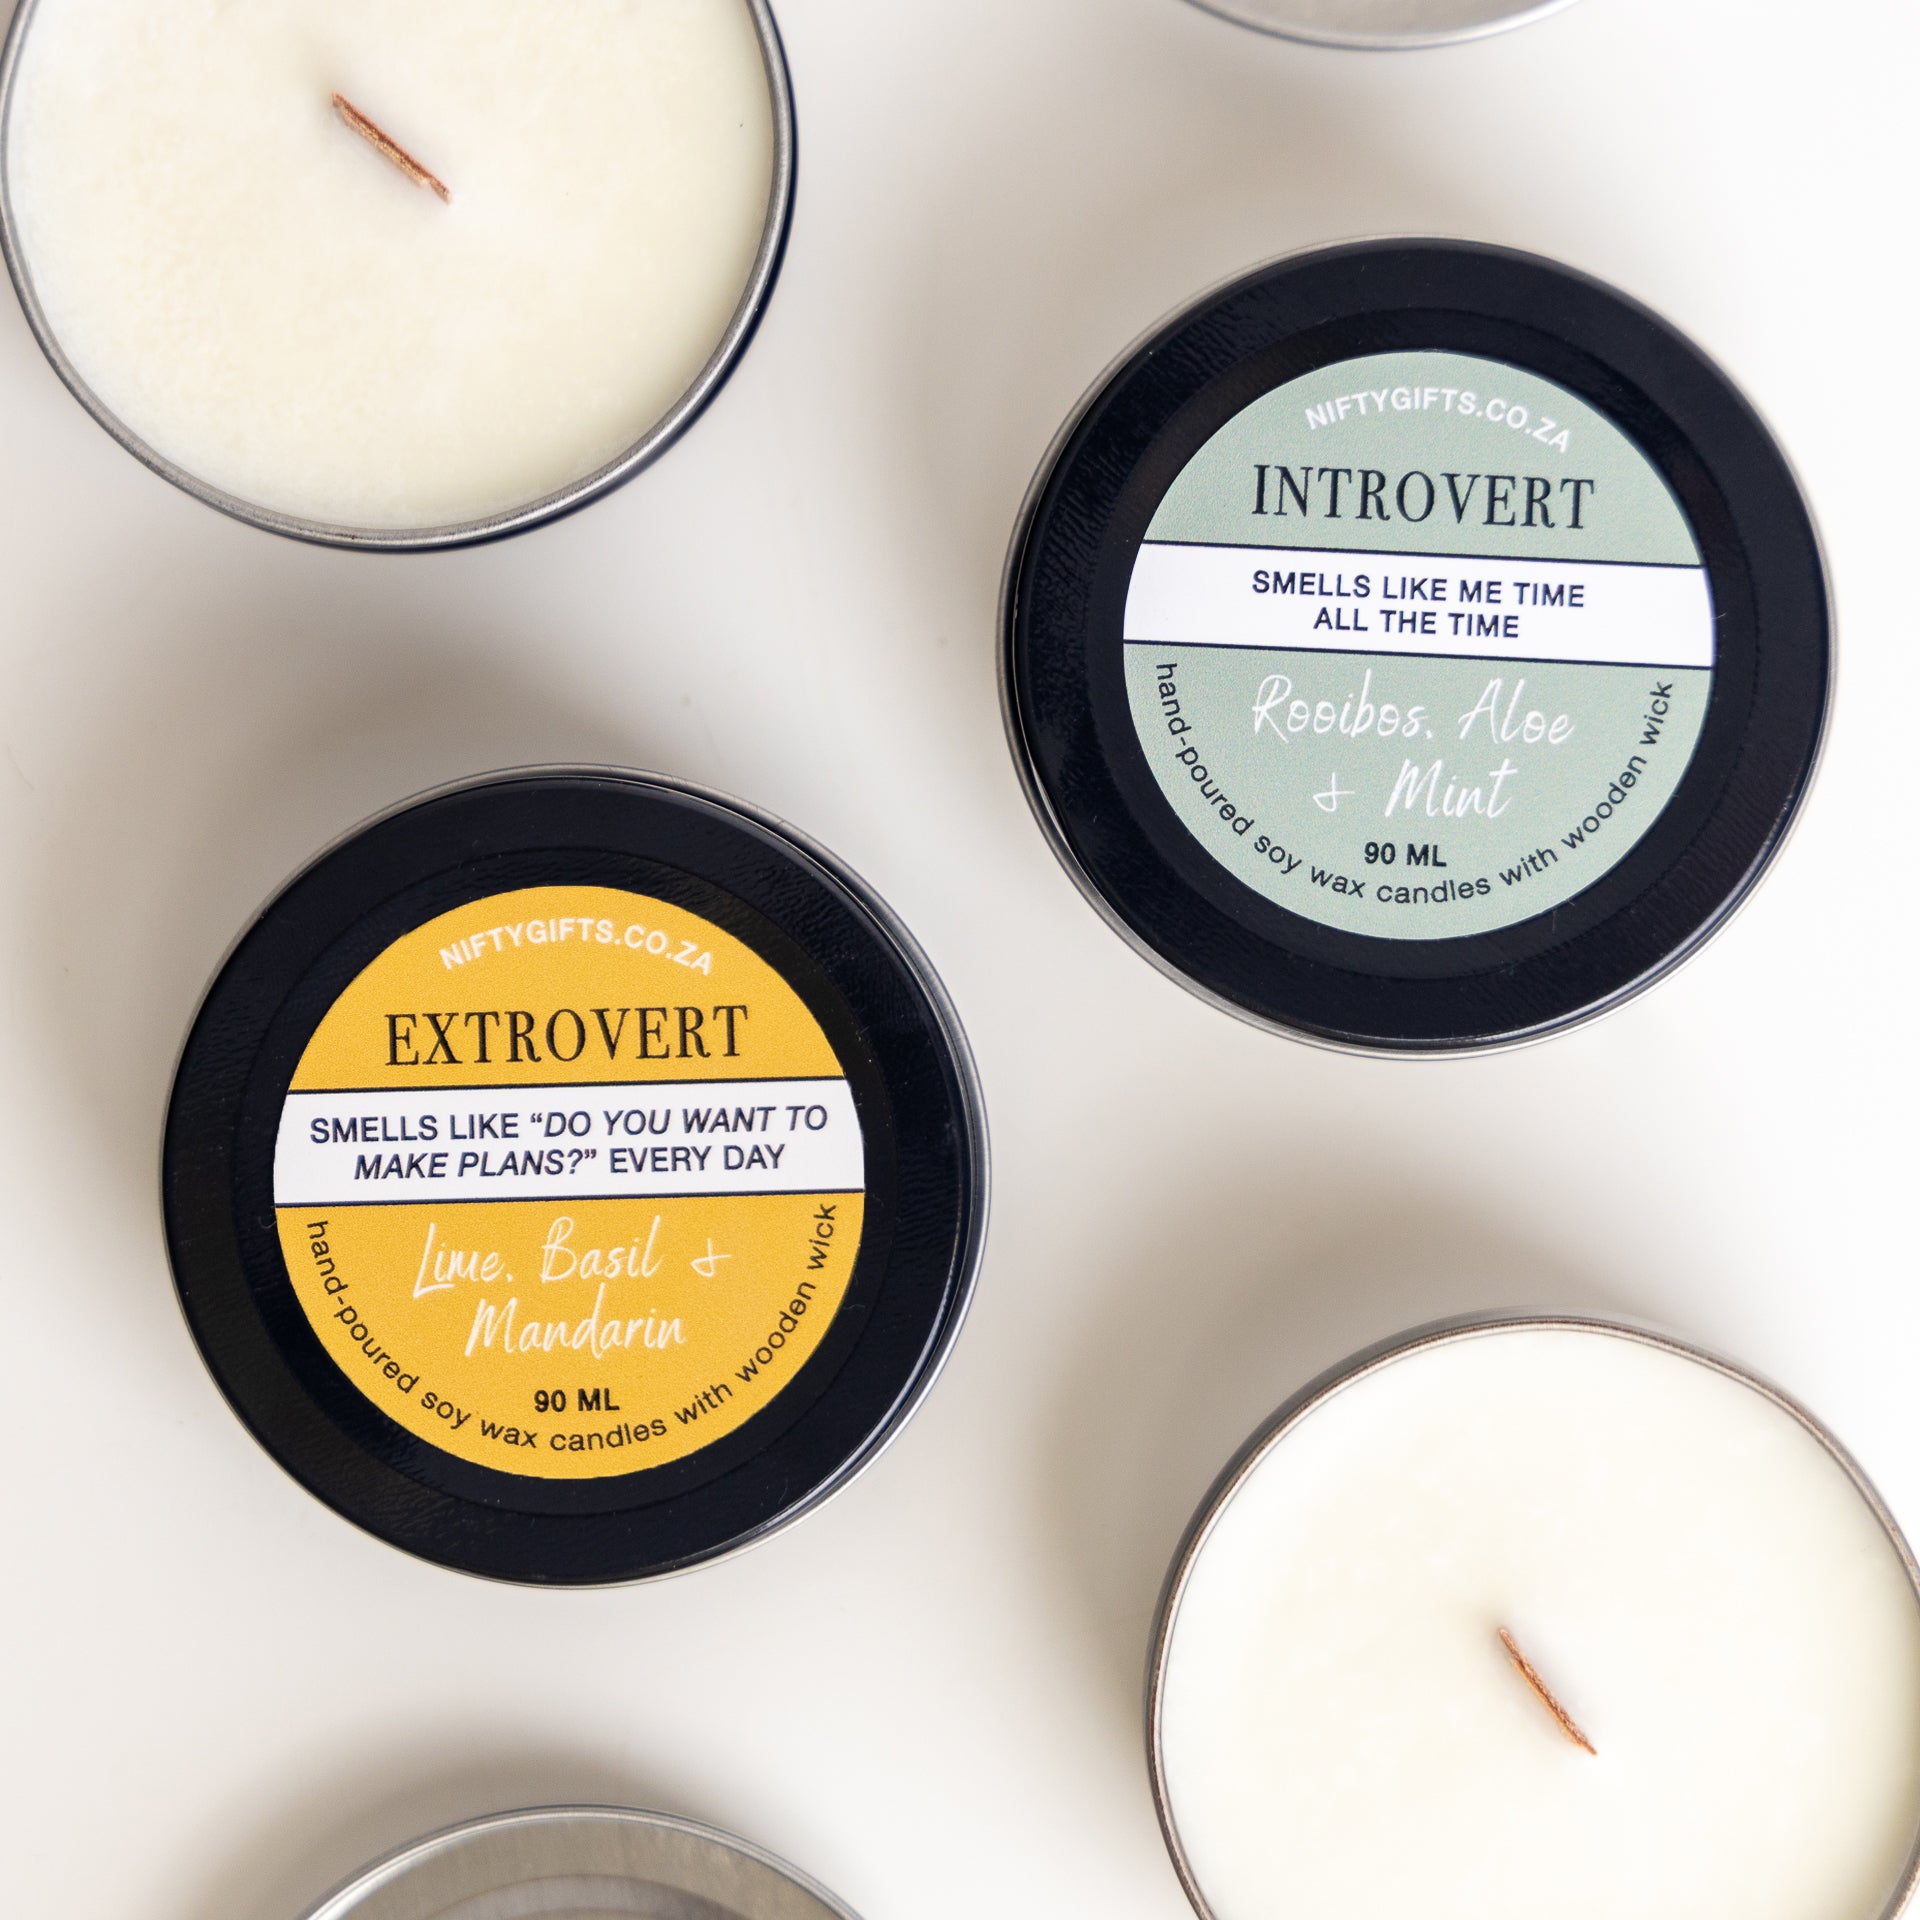 "Introvert" / "Extrovert" Scented Candles